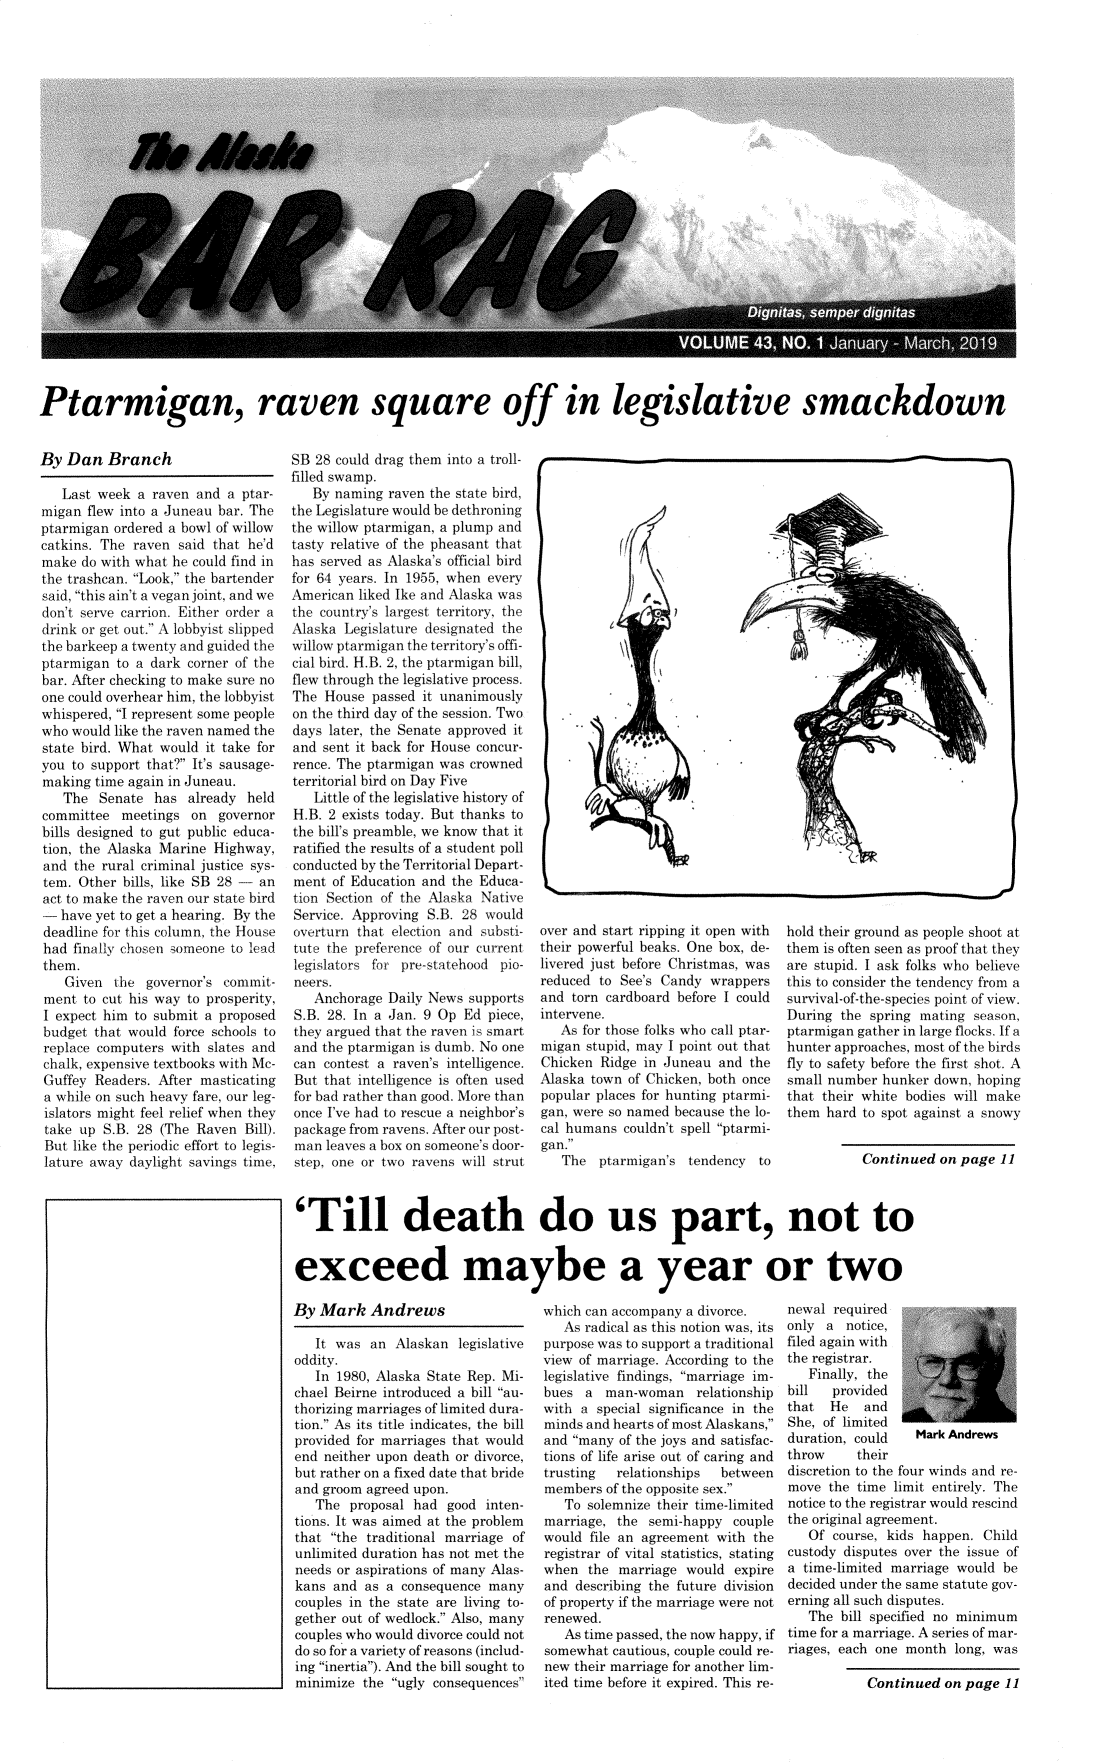 handle is hein.barjournals/askabar0043 and id is 1 raw text is: 
























Ptarmigan, raven square off in legislative smackdown


By  Dan   Branch

   Last week  a raven and  a ptar-
migan  flew into a Juneau bar. The
ptarmigan  ordered a bowl of willow
catkins. The raven  said that he'd
make  do with what he could find in
the trashcan. Look, the bartender
said, this ain't a vegan joint, and we
don't serve carrion. Either order a
drink or get out. A lobbyist slipped
the barkeep a twenty and guided the
ptarmigan  to a dark corner of the
bar. After checking to make sure no
one could overhear him, the lobbyist
whispered, I represent some people
who  would like the raven named the
state bird. What would  it take for
you  to support that? It's sausage-
making  time again in Juneau.
   The  Senate  has  already  held
committee   meetings  on  governor
bills designed to gut public educa-
tion, the Alaska Marine  Highway,
and  the rural criminal justice sys-
tem.  Other bills, like SB 28 - an
act to make the raven our state bird
-  have yet to get a hearing. By the
deadline for this column, the House
had  finally chosen someone to lead
them.
    Given  the governor's commit-
 ment to cut his way to prosperity,
 I expect him to submit a proposed
 budget that would force schools to
 replace computers with slates and
 chalk, expensive textbooks with Mc-
 Guffey Readers. After masticating
 a while on such heavy fare, our leg-
 islators might feel relief when they
 take up S.B. 28 (The Raven  Bill).
 But like the periodic effort to legis-
 lature away daylight savings time,


SB 28 could drag them into a troll-
filled swamp.
   By naming  raven the state bird,
the Legislature would be dethroning
the willow ptarmigan, a plump and
tasty relative of the pheasant that
has served as Alaska's official bird
for 64 years. In 1955, when every
American  liked Ike and Alaska was
the country's largest territory, the
Alaska  Legislature designated the
willow ptarmigan the territory's offi-
cial bird. H.B. 2, the ptarmigan bill,
flew through the legislative process.
The  House  passed it unanimously
on the third day of the session. Two
days later, the Senate approved it
and  sent it back for House concur-
rence. The ptarmigan was  crowned
territorial bird on Day Five
   Little of the legislative history of
H.B. 2 exists today. But thanks to
the bill's preamble, we know that it
ratified the results of a student poll
conducted by the Territorial Depart-
ment  of Education and the Educa-
tion Section of the Alaska Native
Service. Approving S.B. 28  would
overturn that election and substi-
tute the preference of our current
legislators for pre-statehood pio-
neers.
   Anchorage  Daily News supports
S.B. 28. In a Jan. 9 Op  Ed piece,
they argued that the raven is smart
and the ptarmigan is dumb. No one
can  contest a raven's intelligence.
But  that intelligence is often used
for bad rather than good. More than
once I've had to rescue a neighbor's
package from ravens. After our post-
man  leaves a box on someone's door-
step, one or two ravens will strut


over and start ripping it open with
their powerful beaks. One box, de-
livered just before Christmas, was
reduced  to See's Candy wrappers
and  torn cardboard before I could
intervene.
   As for those folks who call ptar-
migan  stupid, may I point out that
Chicken  Ridge in Juneau  and the
Alaska town  of Chicken, both once
popular places for hunting ptarmi-
gan, were so named because the lo-
cal humans  couldn't spell ptarmi-
gan.
   The   ptarmigan's tendency  to


hold their ground as people shoot at
them is often seen as proof that they
are stupid. I ask folks who believe
this to consider the tendency from a
survival-of-the-species point of view.
During  the spring mating  season,
ptarmigan gather in large flocks. If a
hunter approaches, most of the birds
fly to safety before the first shot. A
small number  hunker down, hoping
that their white bodies will make
them  hard to spot against a snowy


Continued  on page  11


'Till death do us part, not to


exceed maybe a year or two


By  Mark   Andrews


   It was  an Alaskan  legislative
oddity.
   In 1980, Alaska State Rep. Mi-
chael Beirne introduced a bill au-
thorizing marriages of limited dura-
tion. As its title indicates, the bill
provided for marriages that would
end neither upon death or divorce,
but rather on a fixed date that bride
and groom agreed upon.
   The  proposal had  good inten-
tions. It was aimed at the problem
that the traditional marriage of
unlimited duration has not met the
needs or aspirations of many Alas-
kans  and as a consequence  many
couples in the state are living to-
gether out of wedlock. Also, many
couples who would divorce could not
do so for a variety of reasons (includ-
ing inertia). And the bill sought to
minimize  the ugly consequences


which can accompany a divorce.
   As radical as this notion was. its
purpose was to support a traditional
view of marriage. According to the
legislative findings, marriage im-
bues  a  man-woman relationship
with a  special significance in the
minds and hearts of most Alaskans,
and many  of the joys and satisfac-
tions of life arise out of caring and
trusting  relationships  between
members  of the opposite sex.
   To solemnize their time-limited
marriage,  the semi-happy  couple
would  file an agreement with the
registrar of vital statistics, stating
when  the  marriage would  expire
and  describing the future division
of property if the marriage were not
renewed.
   As time passed, the now happy, if
somewhat  cautious, couple could re-
new their marriage for another lim-
ited time before it expired. This re-


newal  required
only  a  notice,
filed again with
the registrar.
   Finally, the
bill   provided
that  He   and
She, of limited
duration, could    Mark Andrews
throw     their
discretion to the four winds and re-
move  the time limit entirely. The
notice to the registrar would rescind
the original agreement.
   Of  course, kids happen. Child
custody disputes over the issue of
a time-limited marriage would  be
decided under the same statute gov-
erning all such disputes.
   The  bill specified no minimum
time for a marriage. A series of mar-
riages, each one month  long, was

            Continued  on page 11


I


